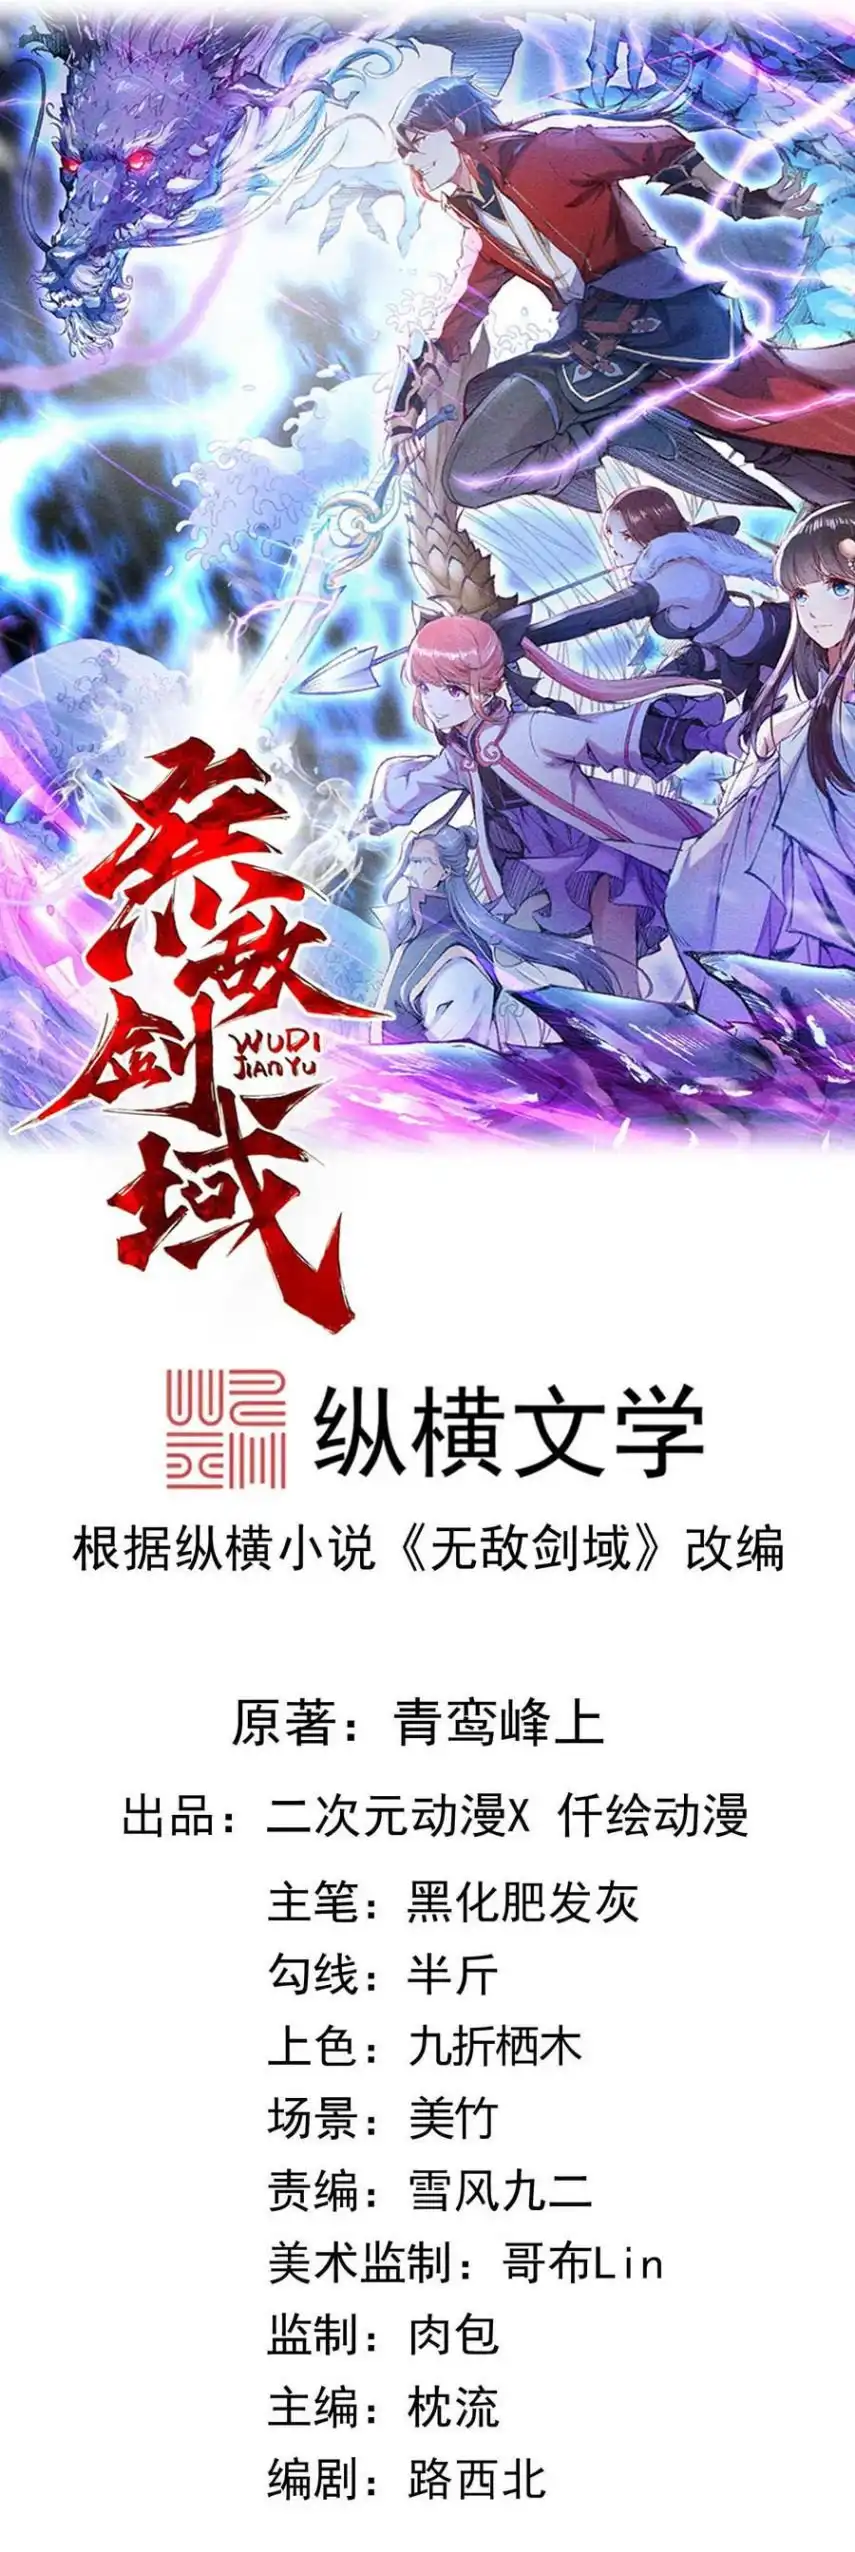 Invincible Sword Domain Chapter 60